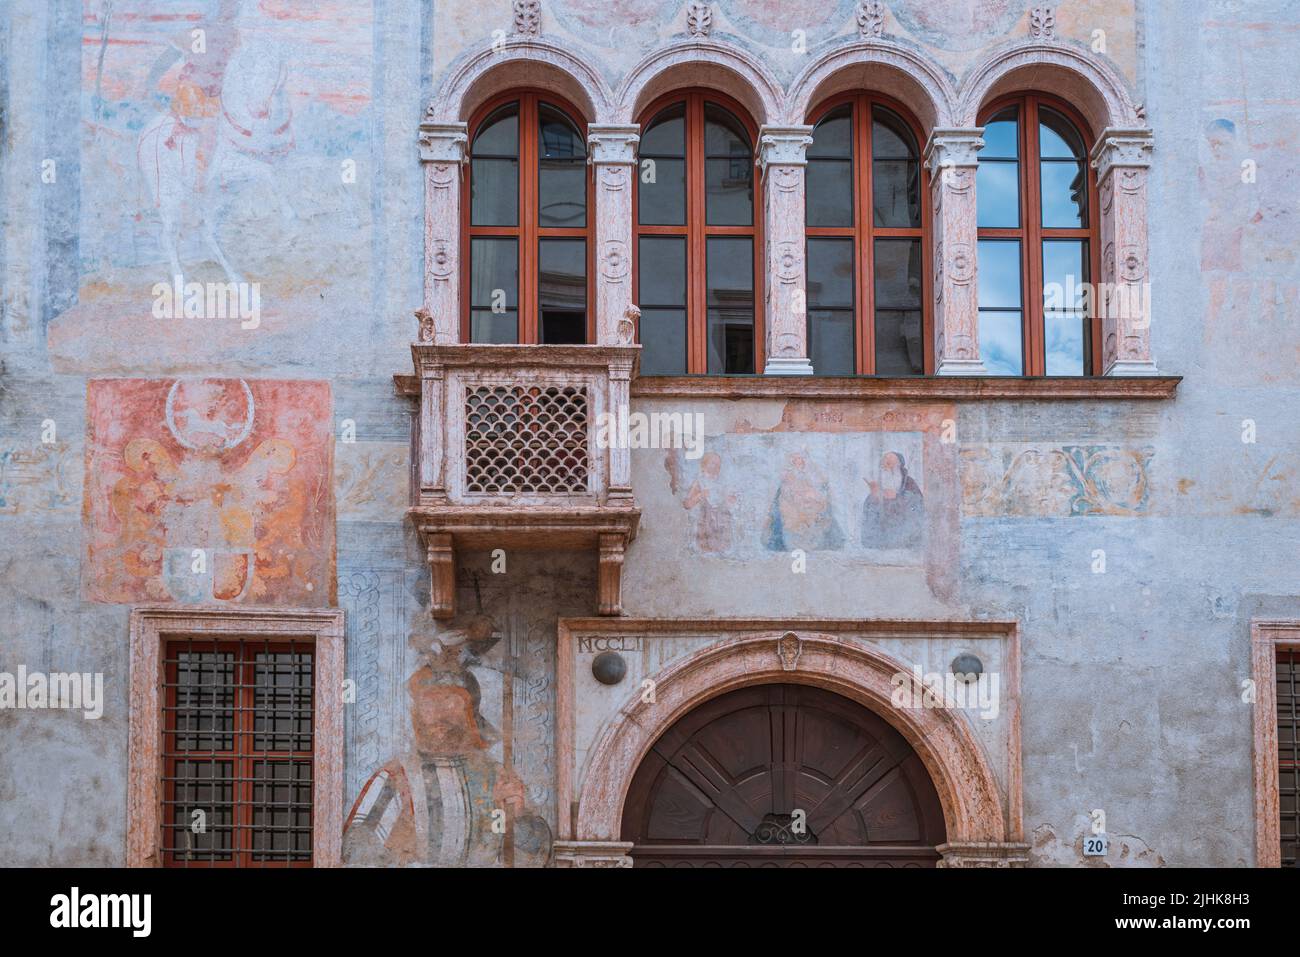 Palazzo Quetta - Alberti Colico is a historic building in Trento, whose peculiarity lies in the frescoed facade dating back to the 15th-16th century. Stock Photo